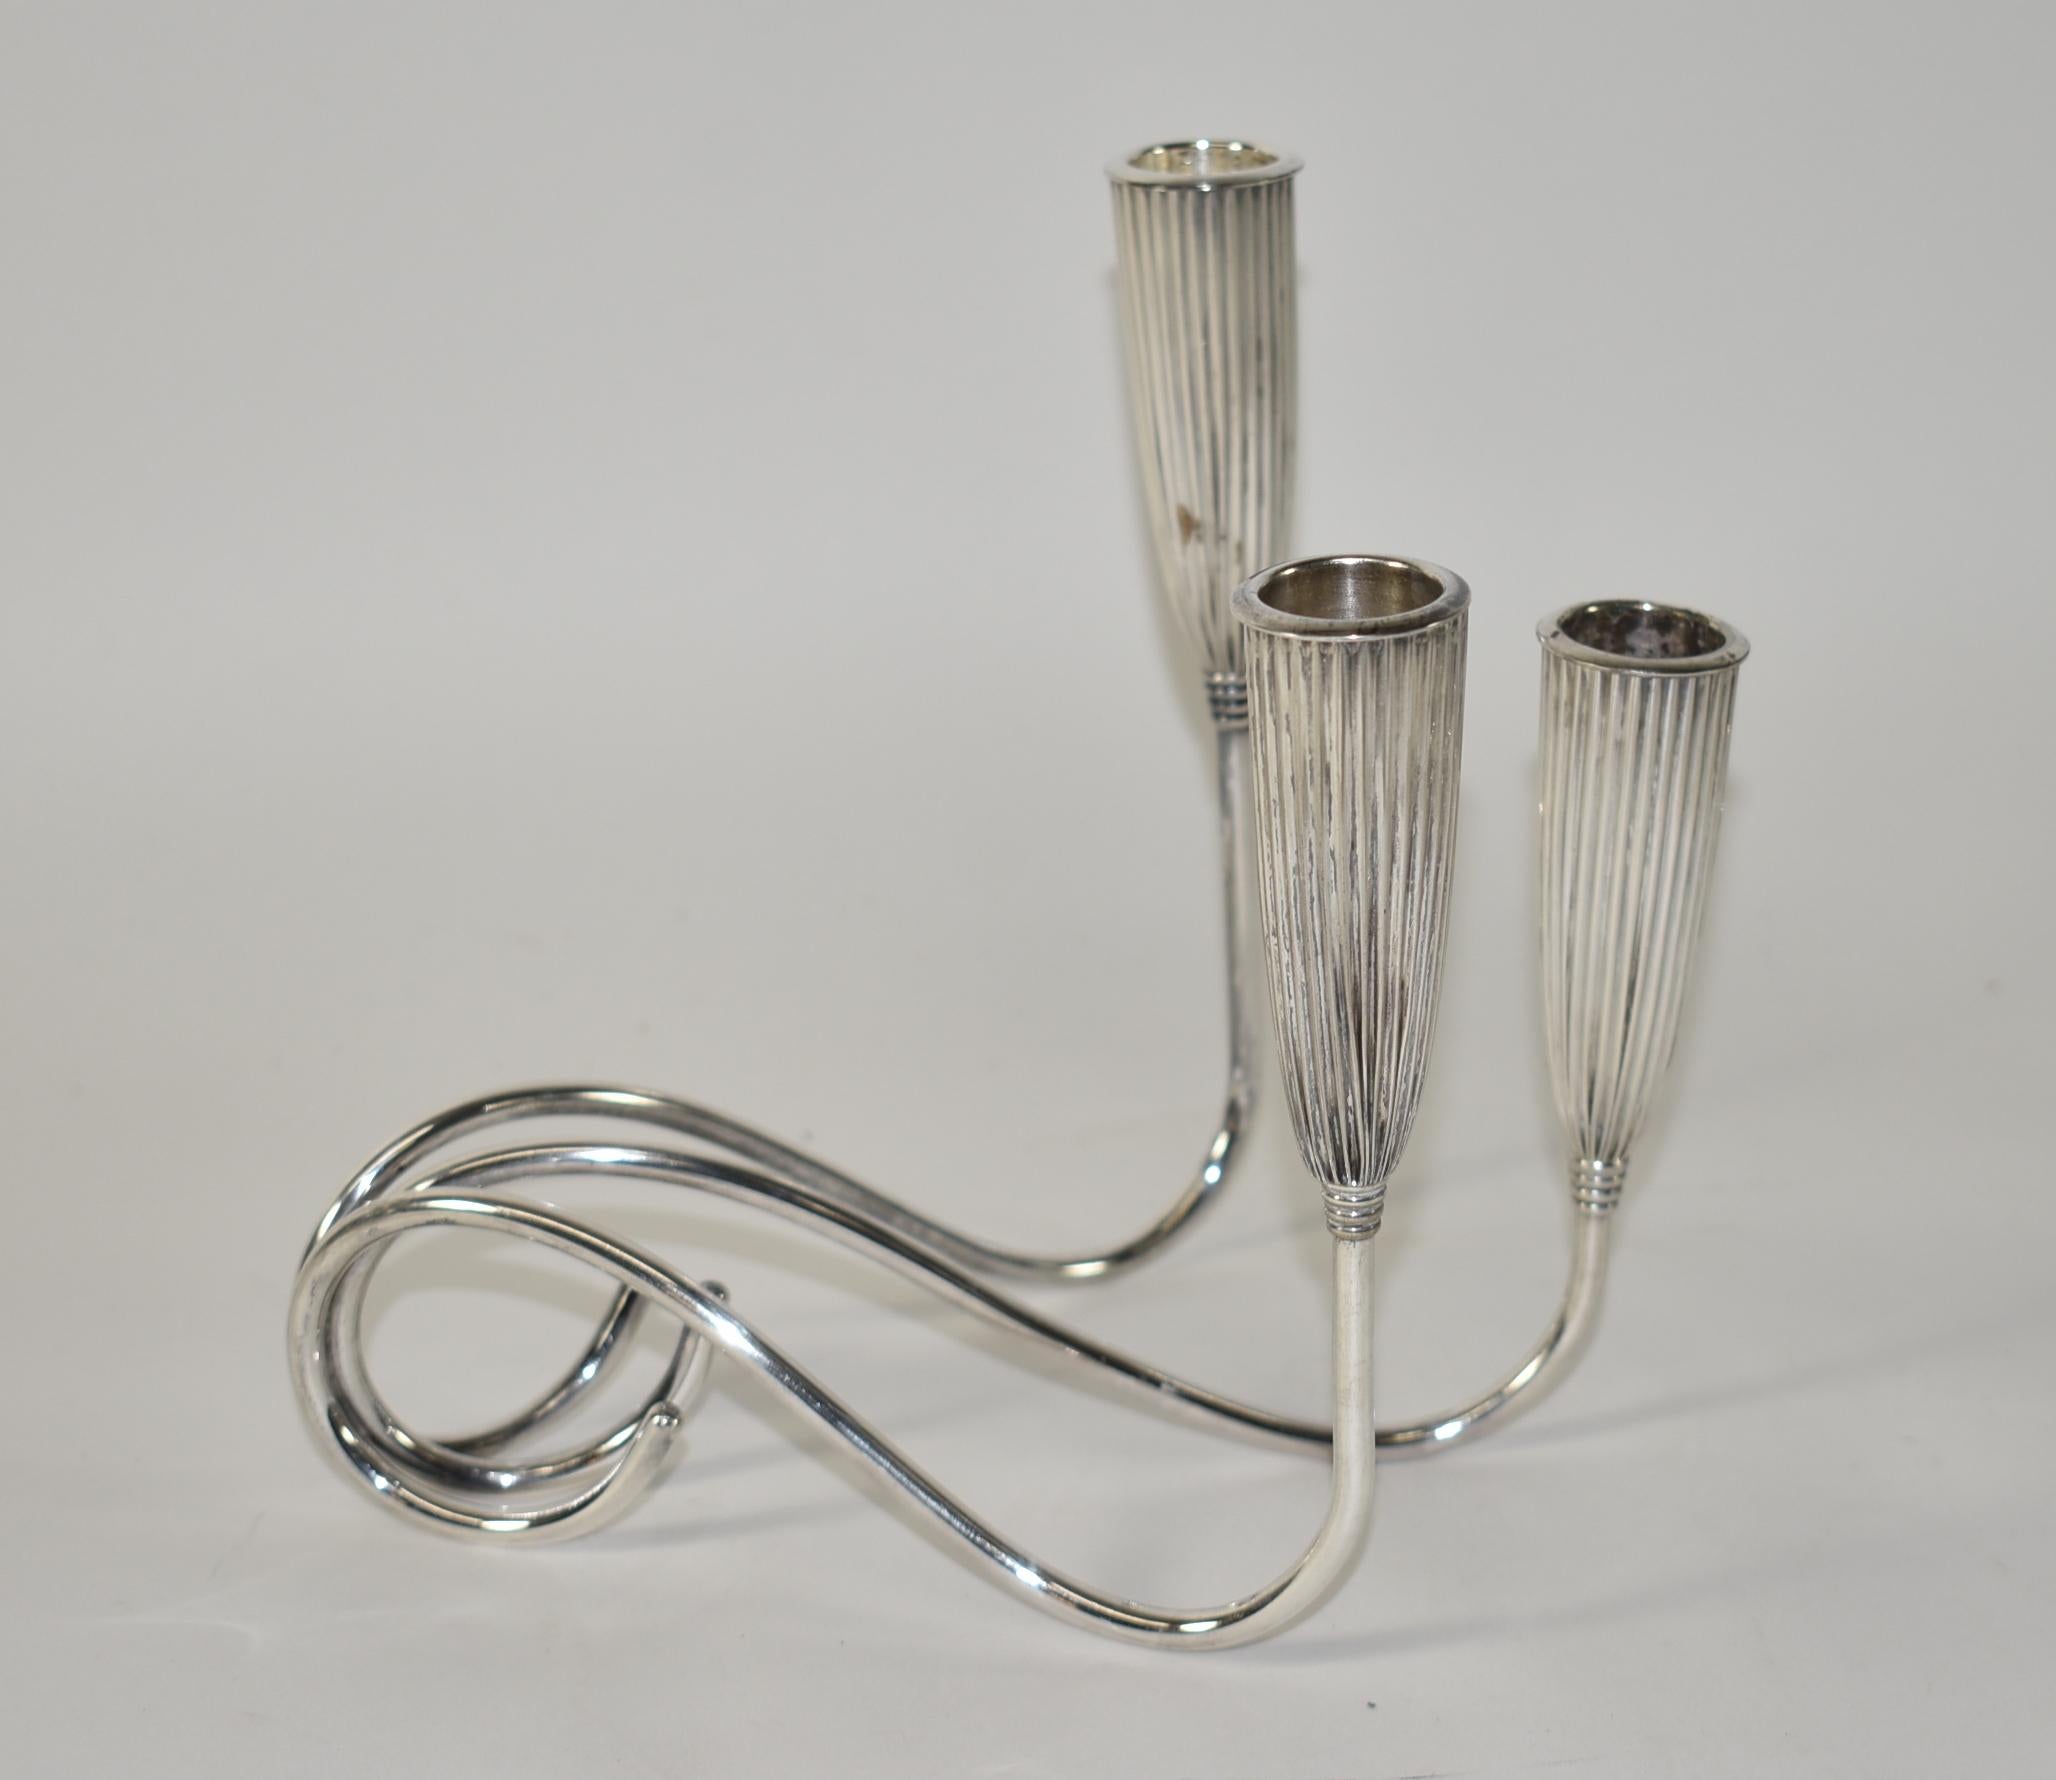 Pair Art Deco Triple Branch Fluted Silver Plated Candlestick Holders by Napier In Good Condition For Sale In Toledo, OH